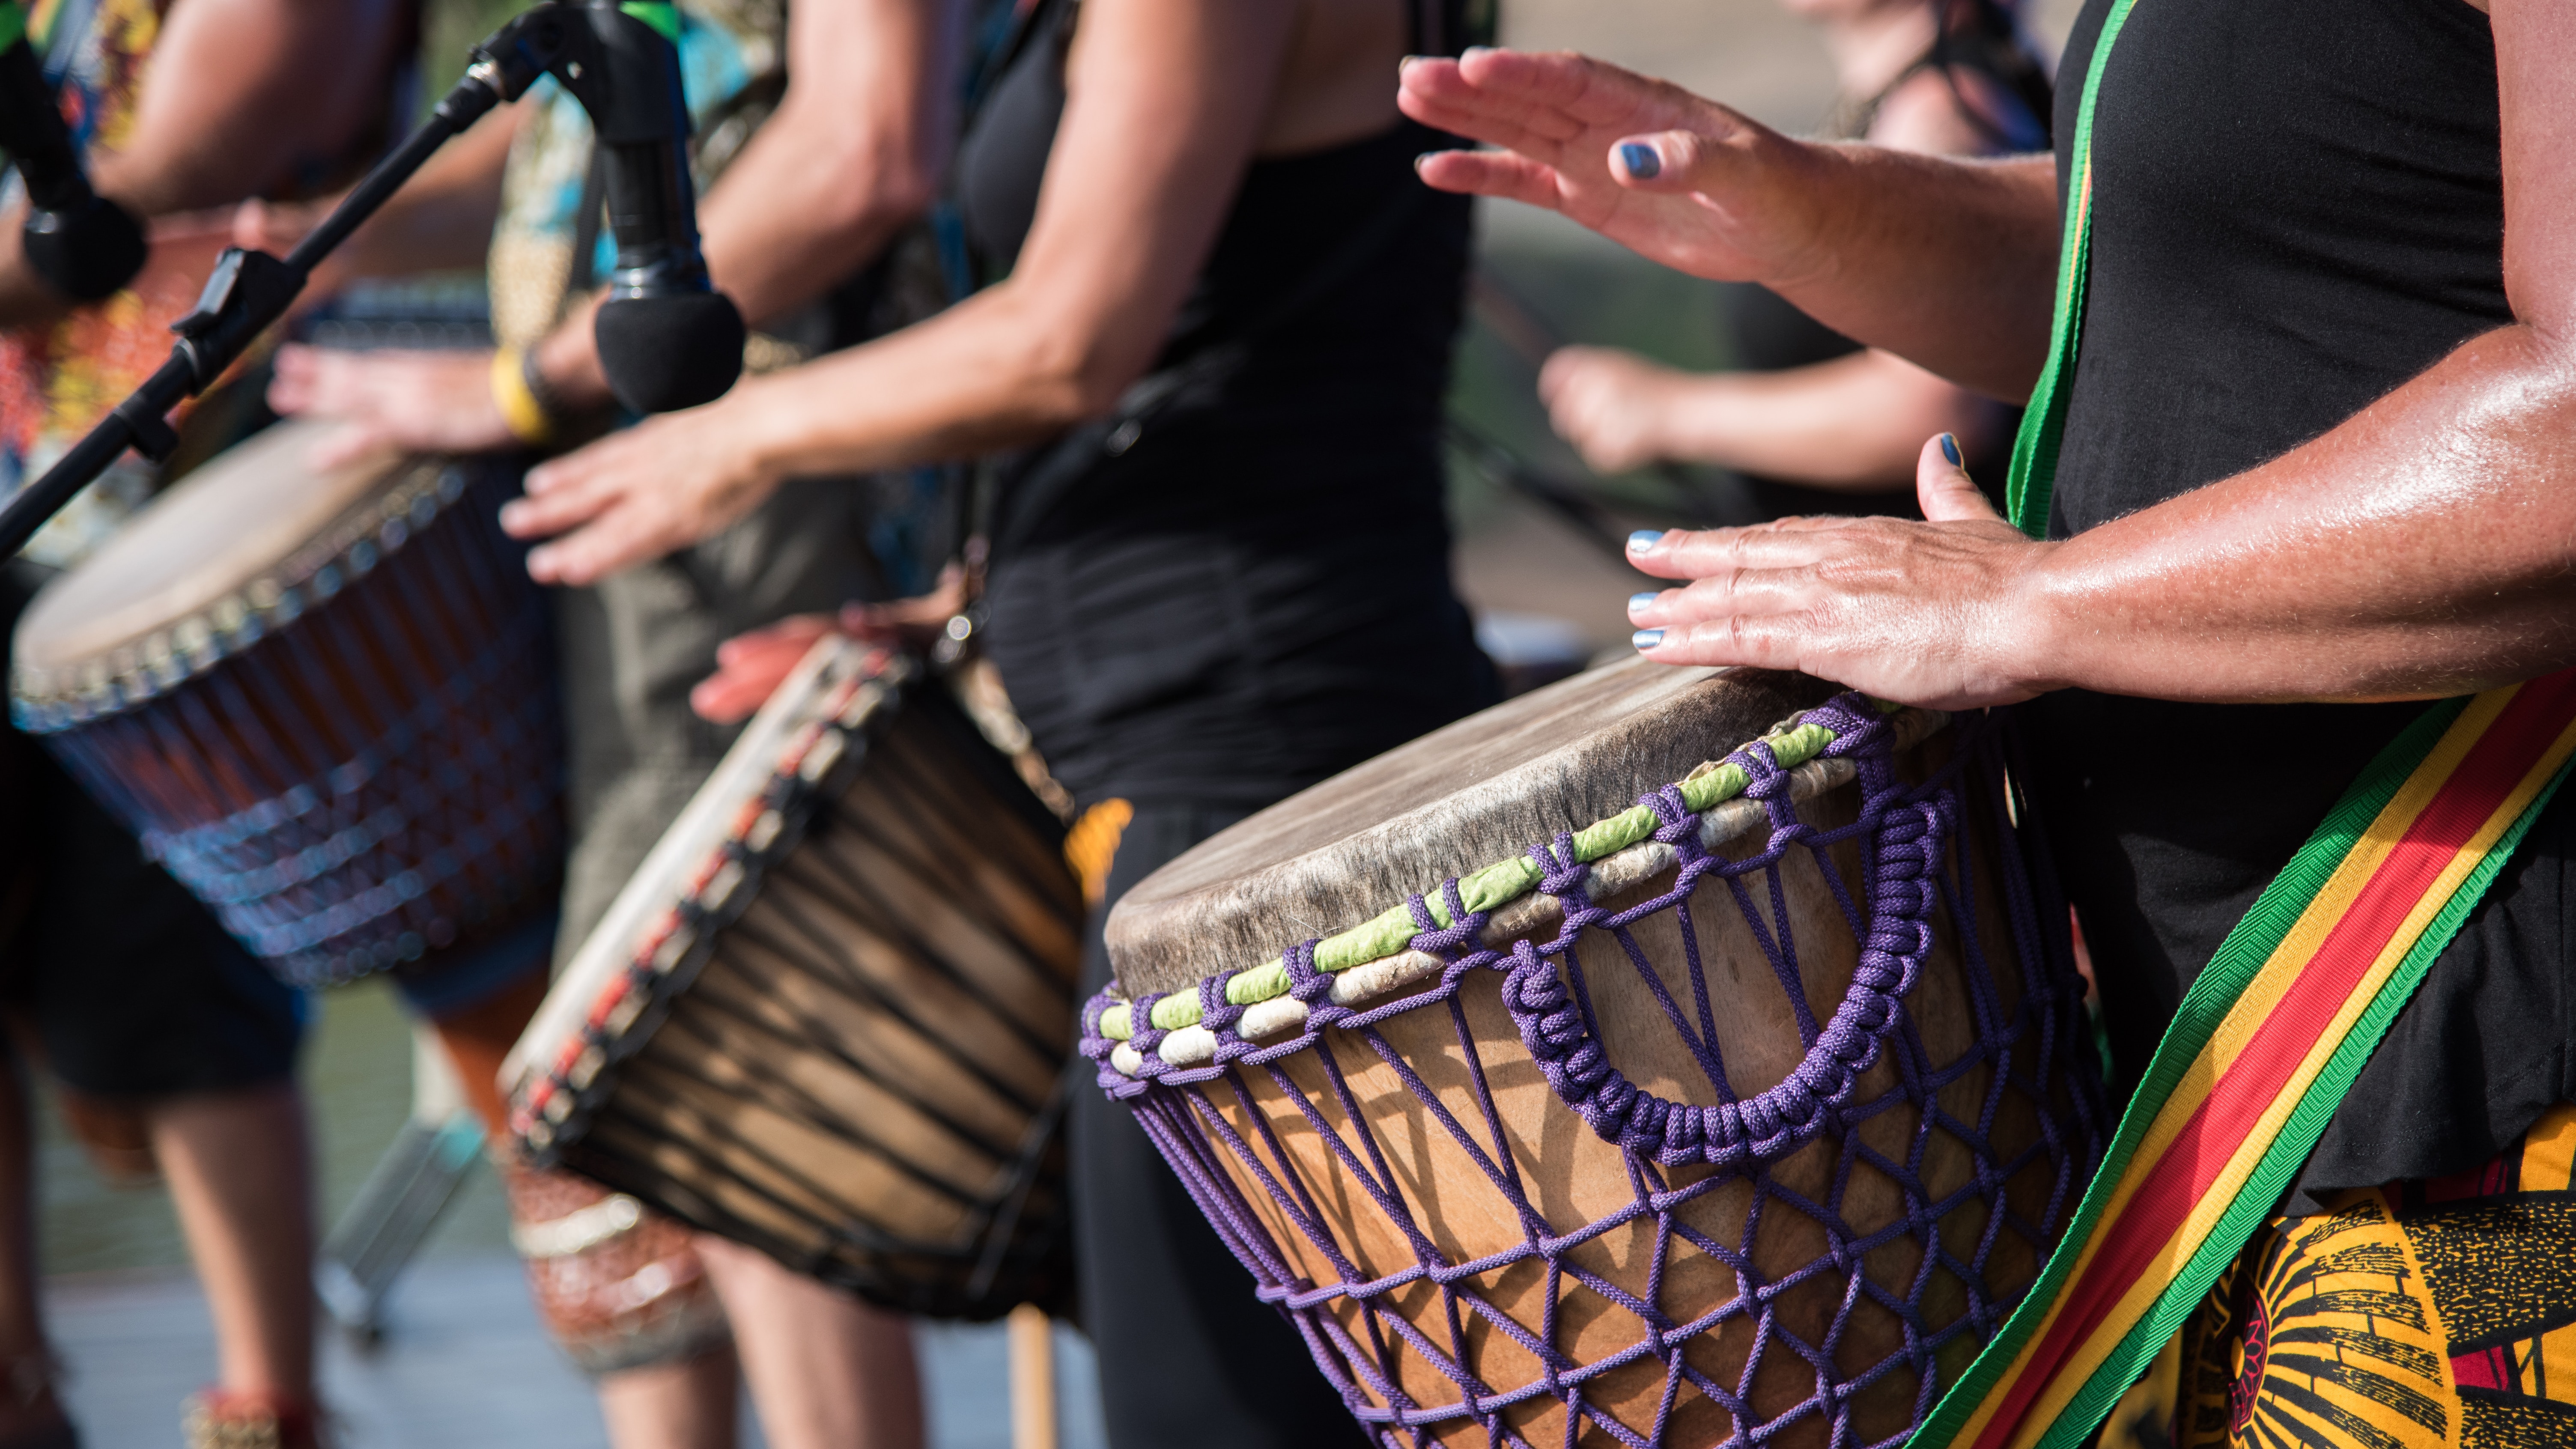 Image of people playing a drums